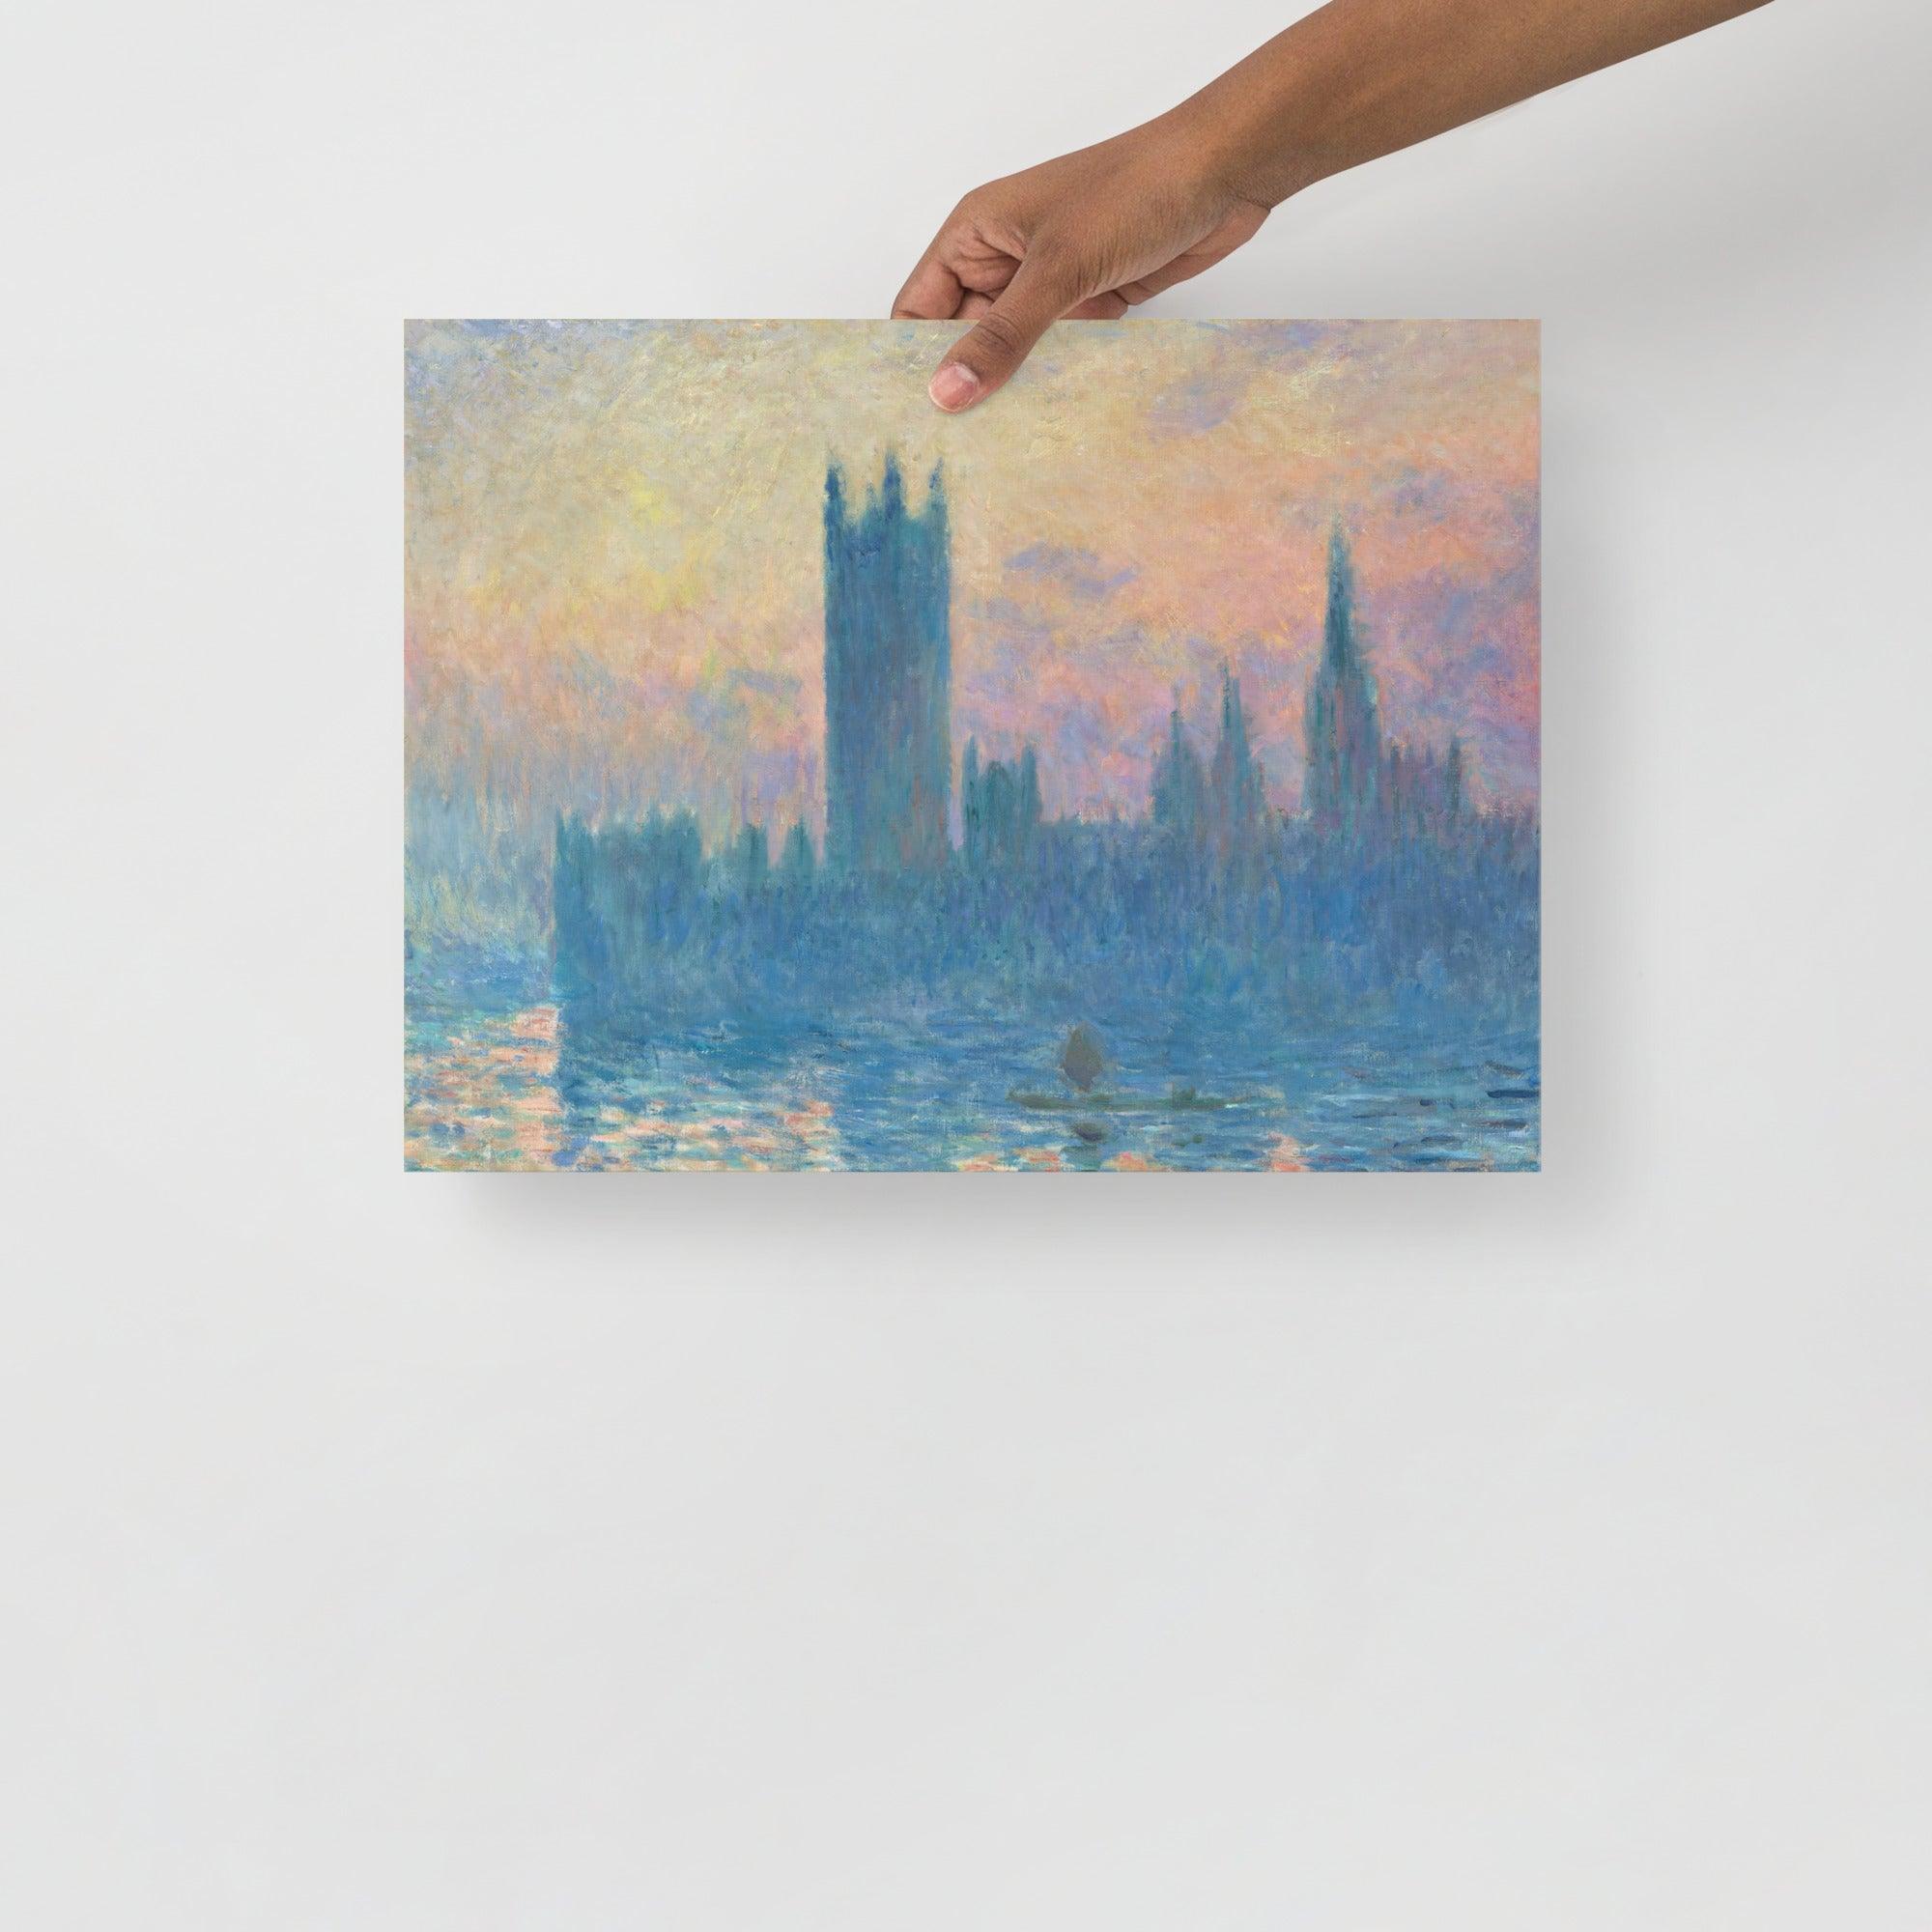 The Houses of Parliament, Sunset by Claude Monet poster on a plain backdrop in size 12x16”.